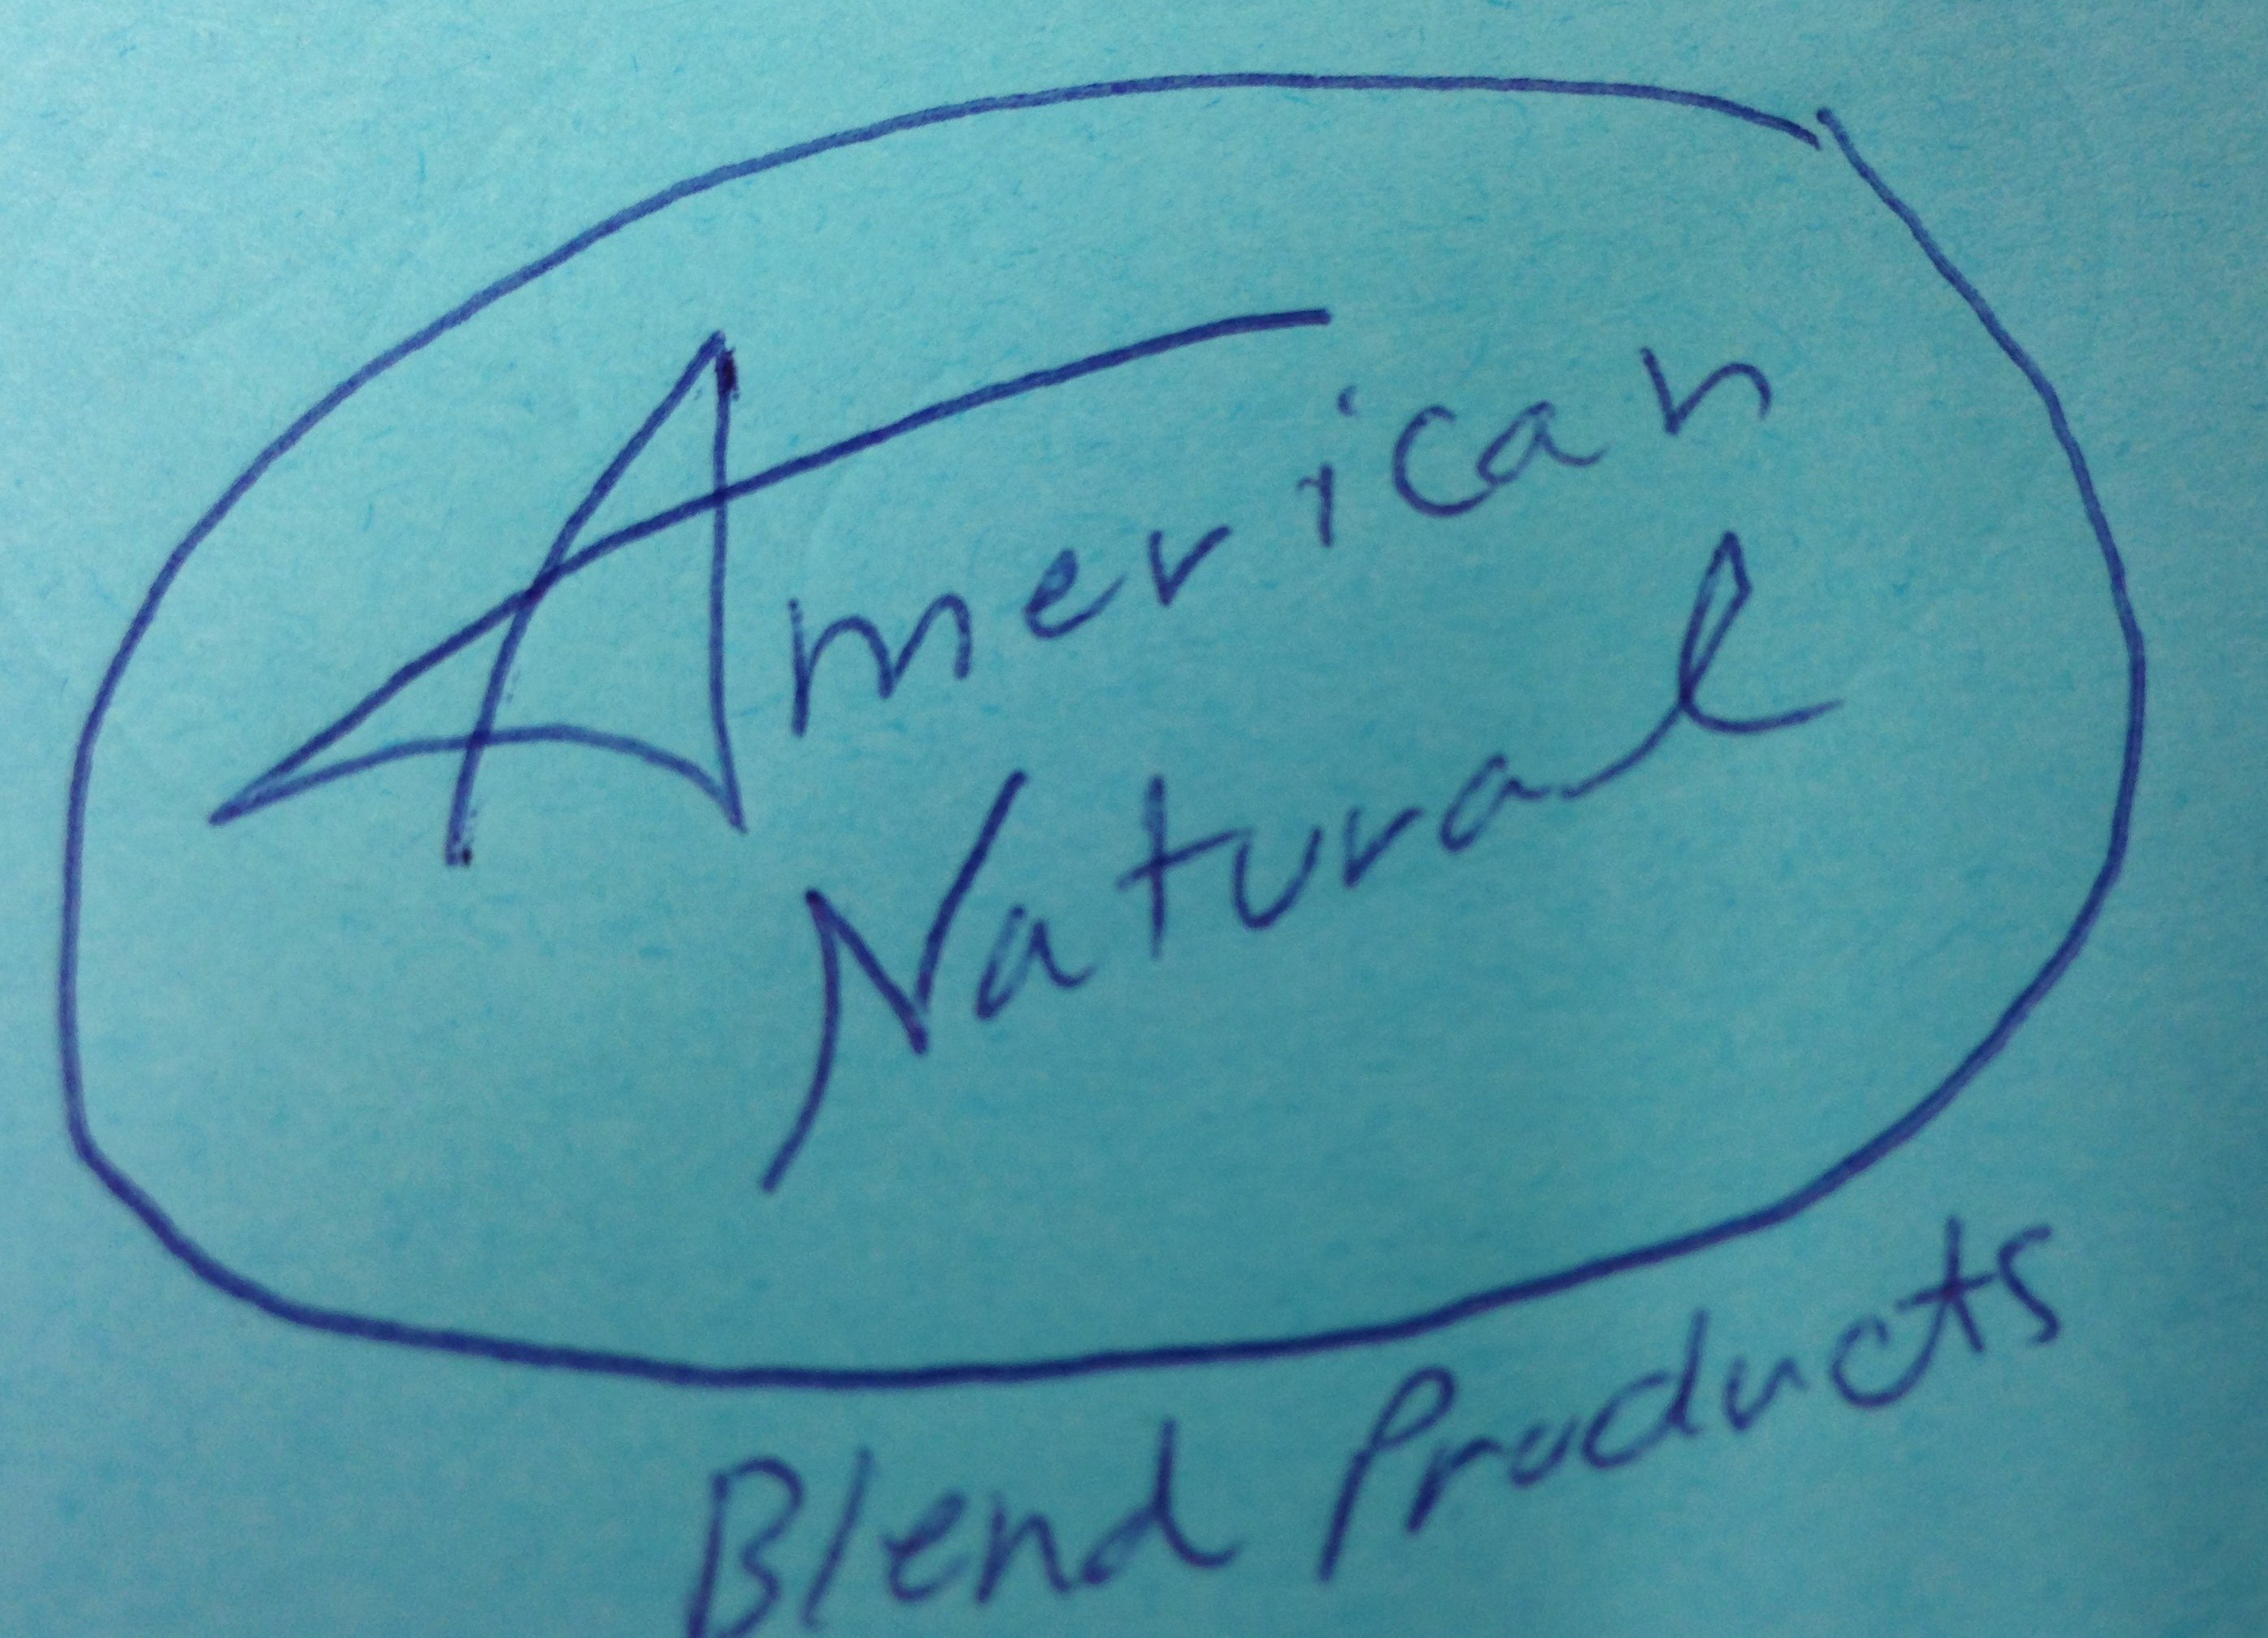  AMERICAN NATURAL BLEND PRODUCTS